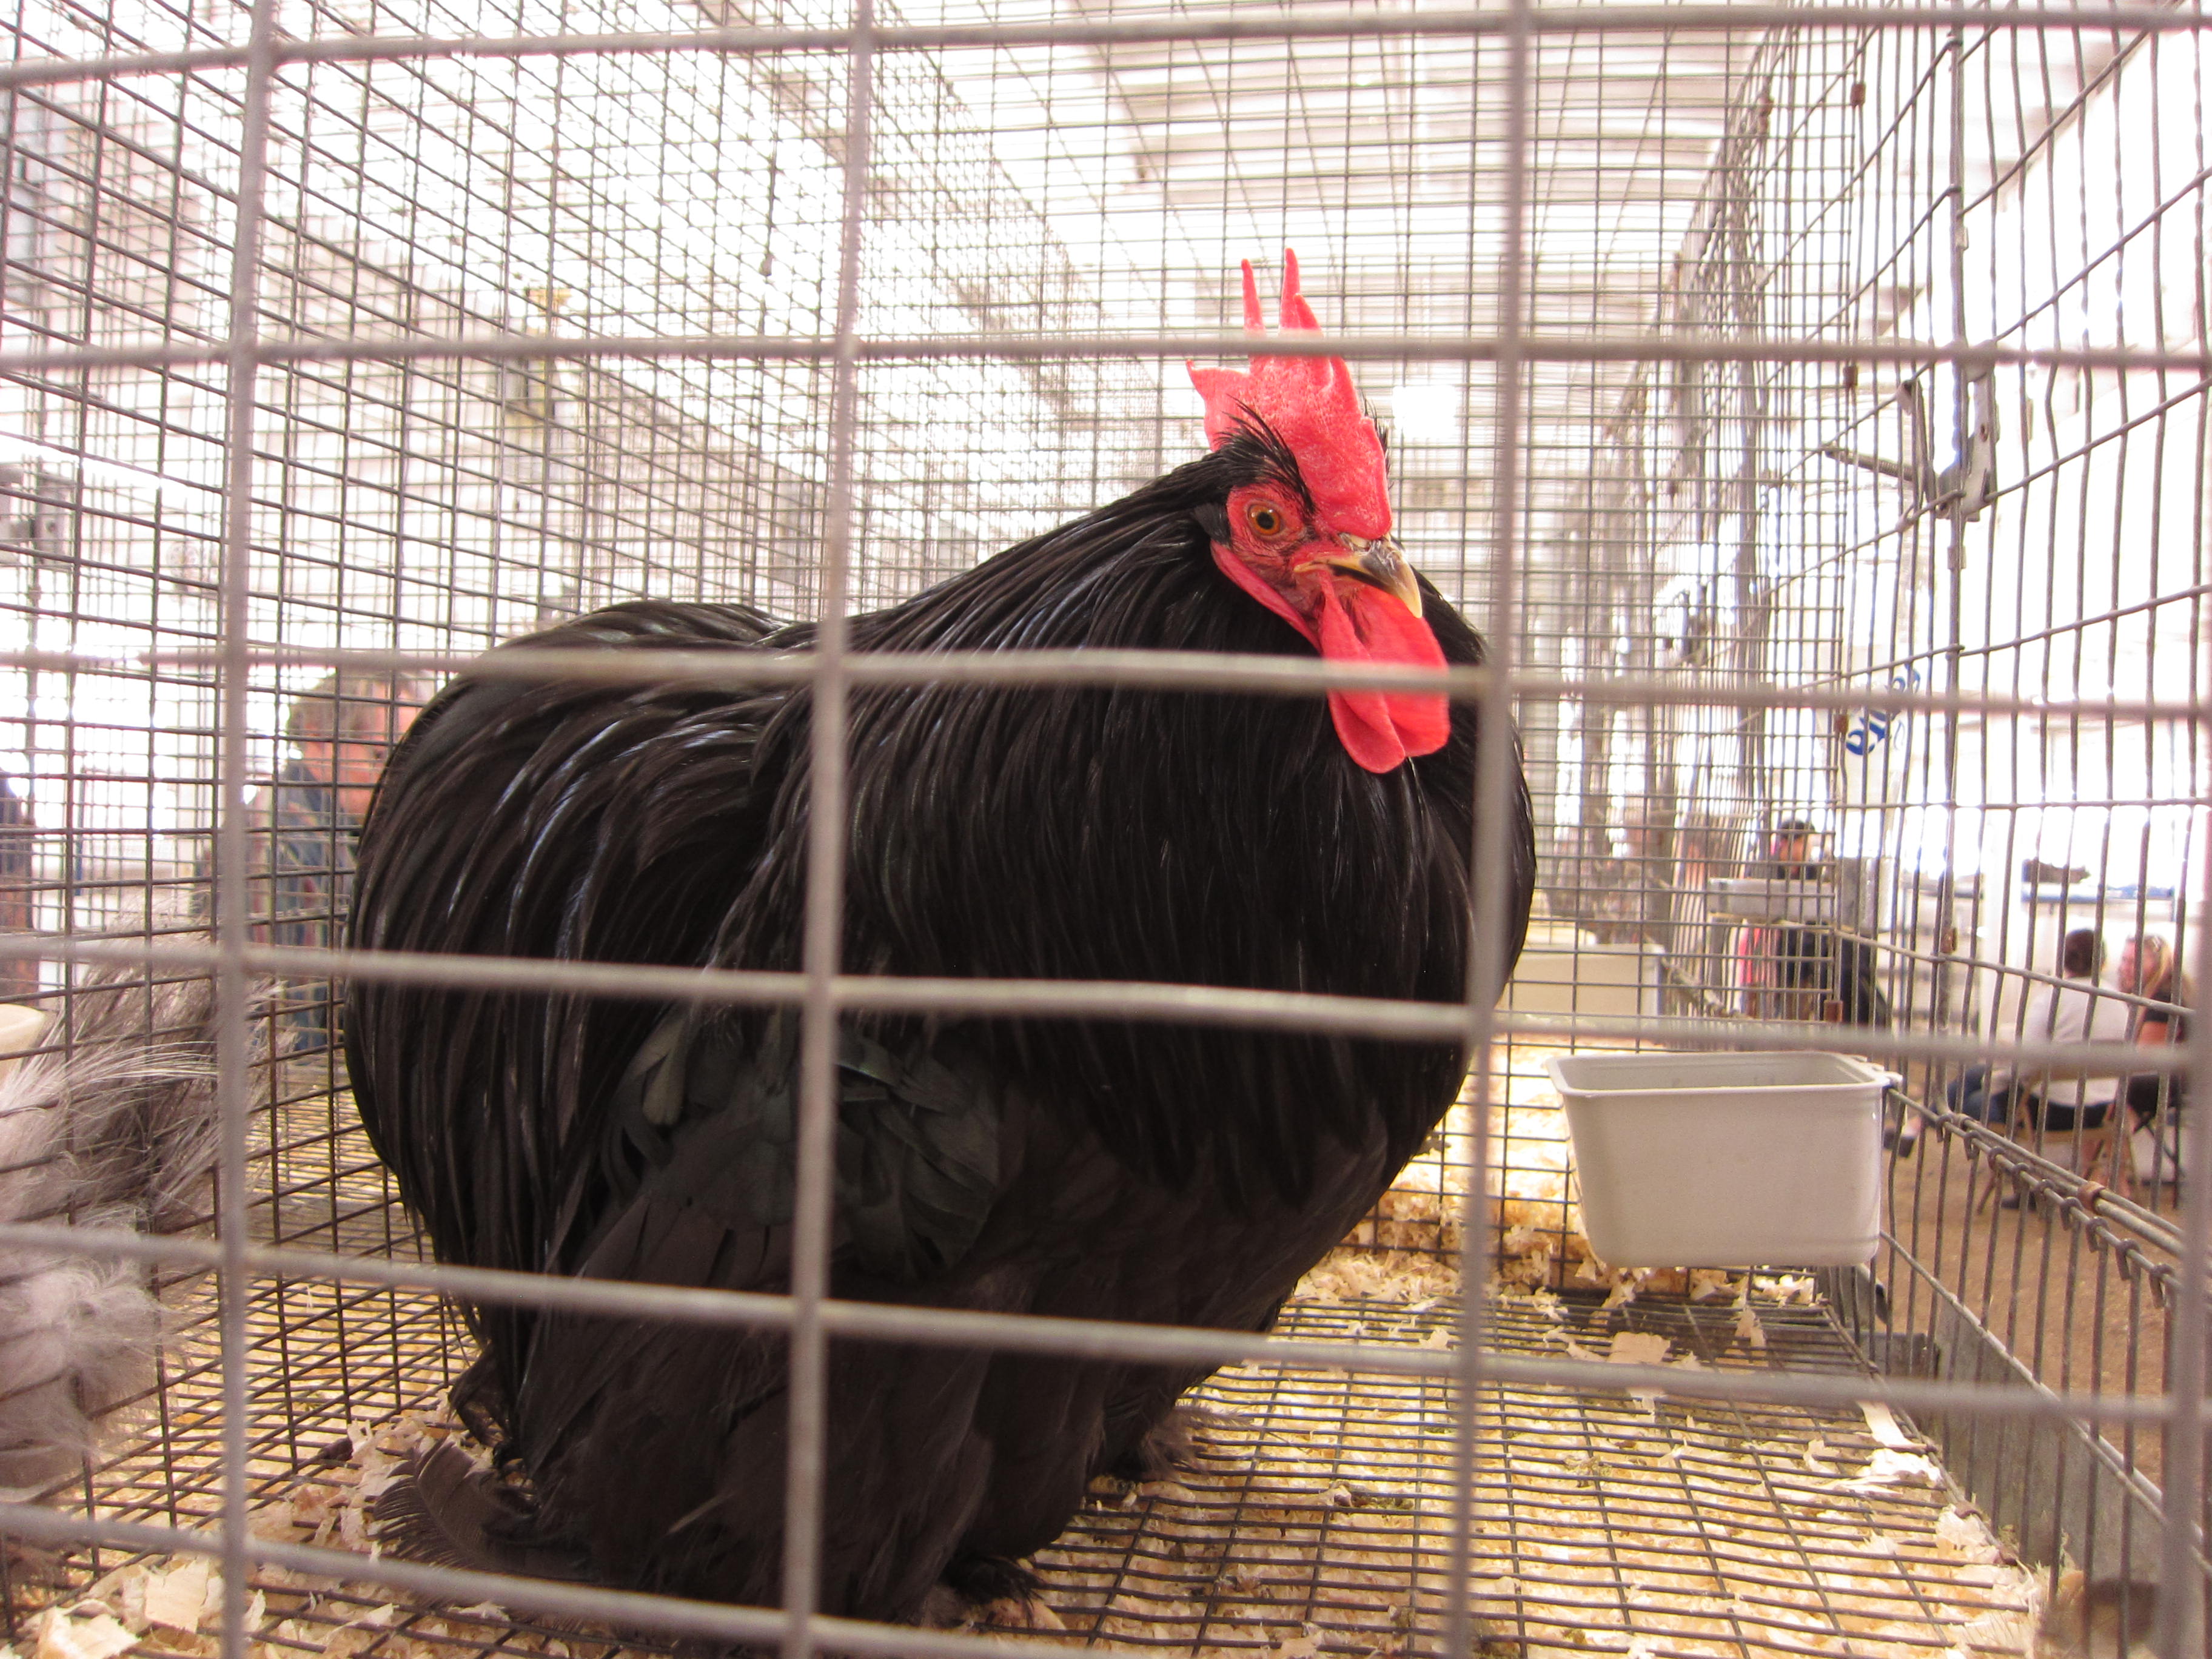 The heritage breed display showcased gorgeous chickens of all shapes and colors. 